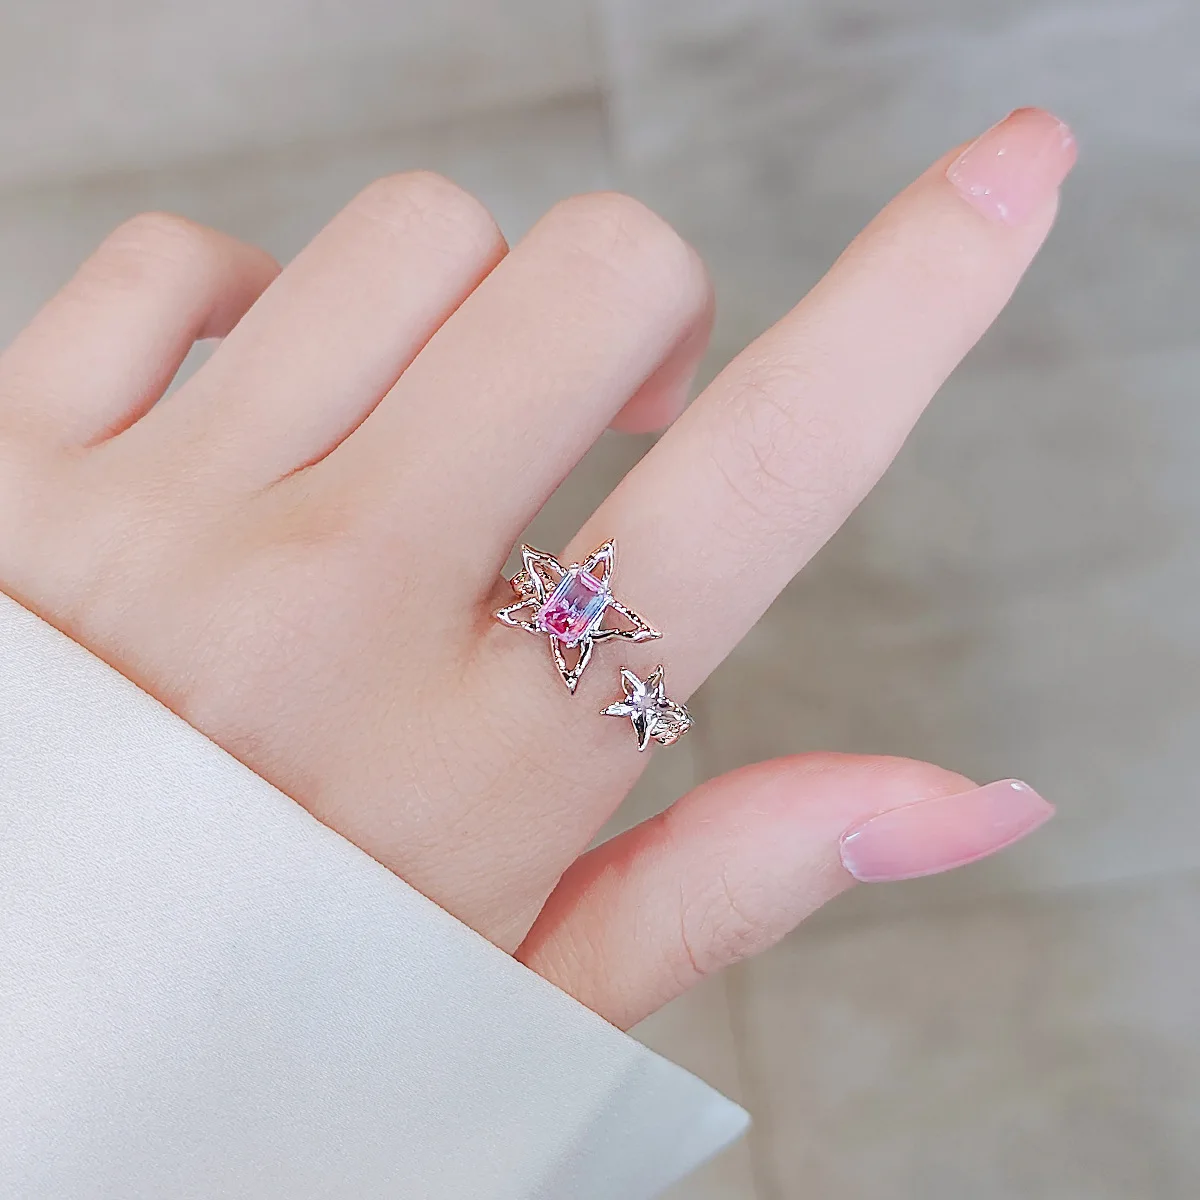 PREMIUM TRADE Valentine Gifts Adjustable Queen & King Limited Edition Love  Valentine Sterling Silver Couple Rings Finger Rings for Girls Boys Men  Couples Girlfriend Women Lovers Charming & Beautiful valentine Gift for